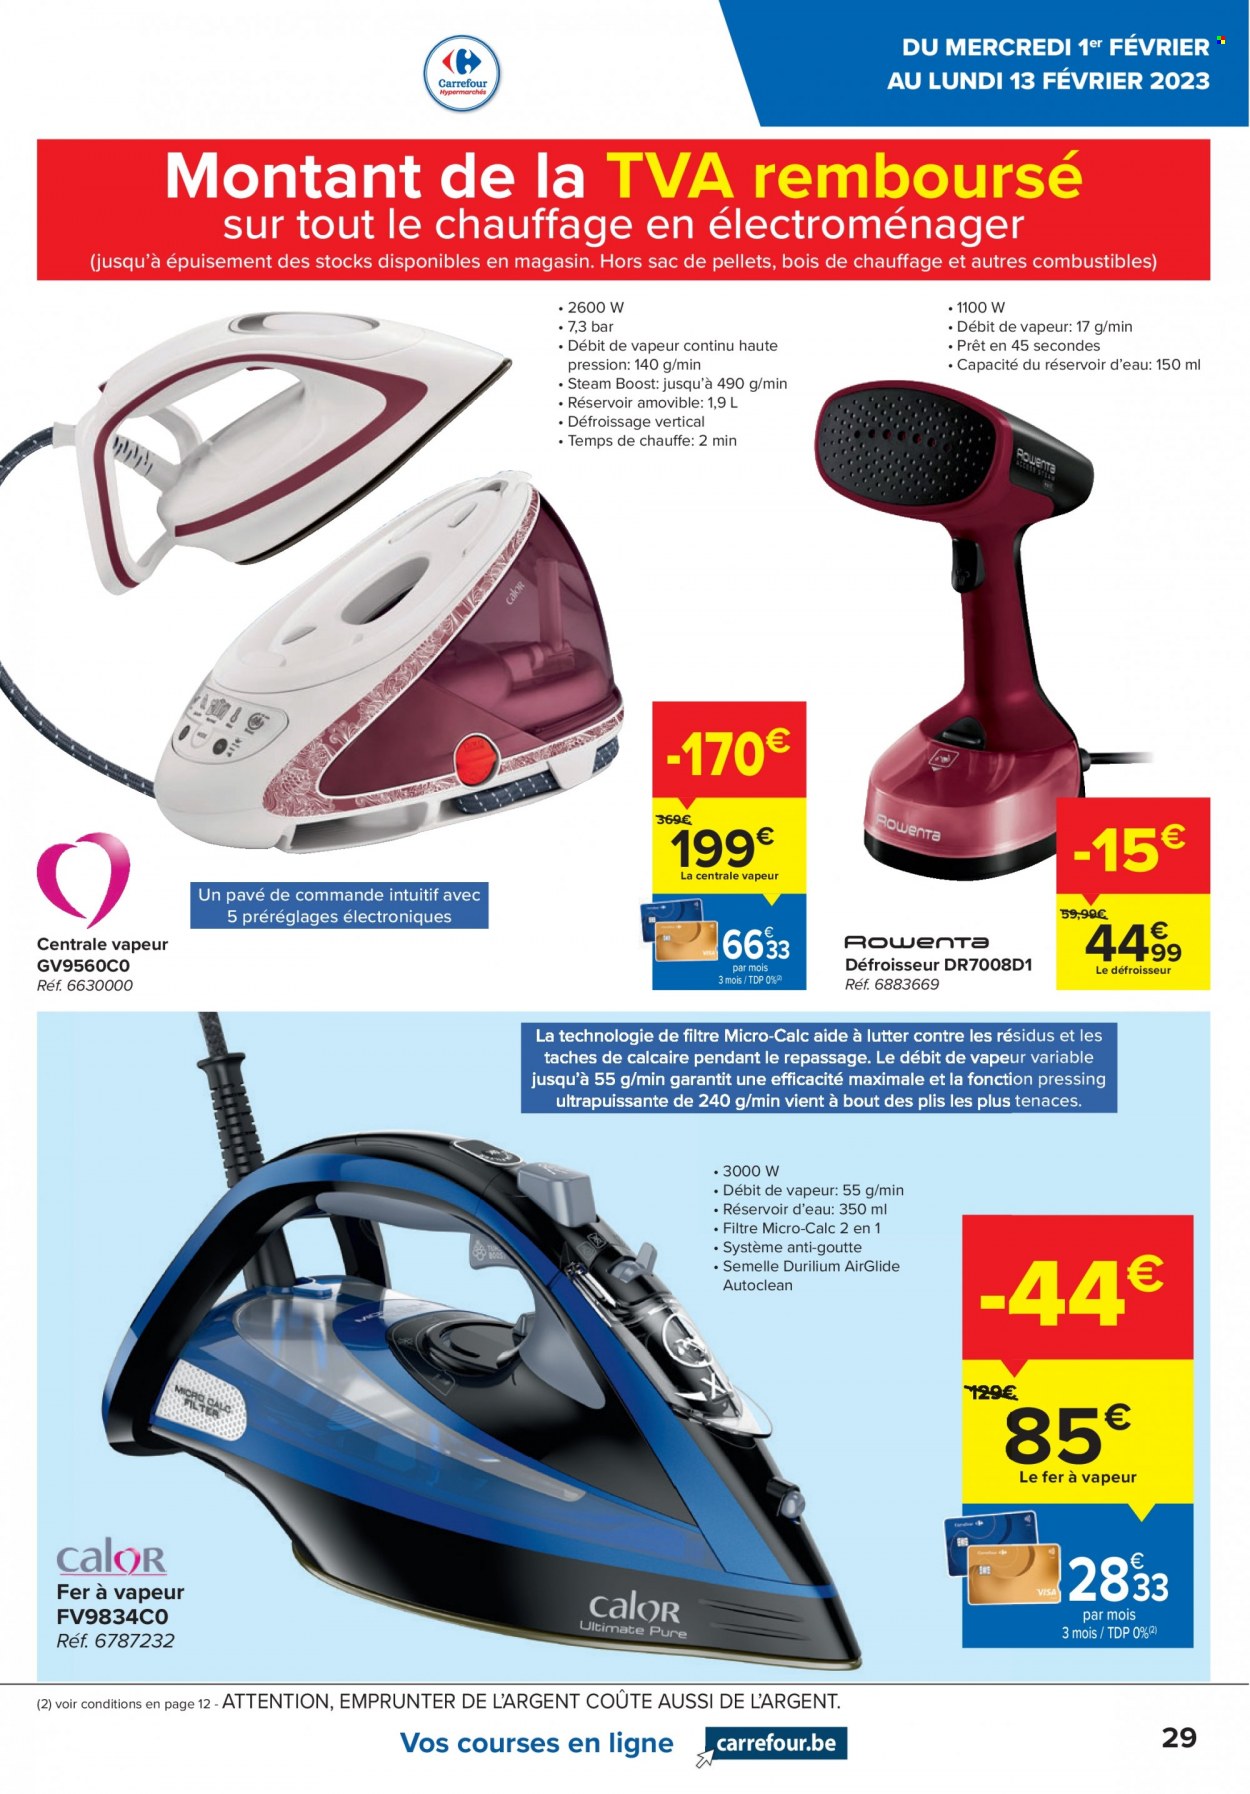 Catalogue Carrefour hypermarkt - 1.2.2023 - 13.2.2023. Page 29.